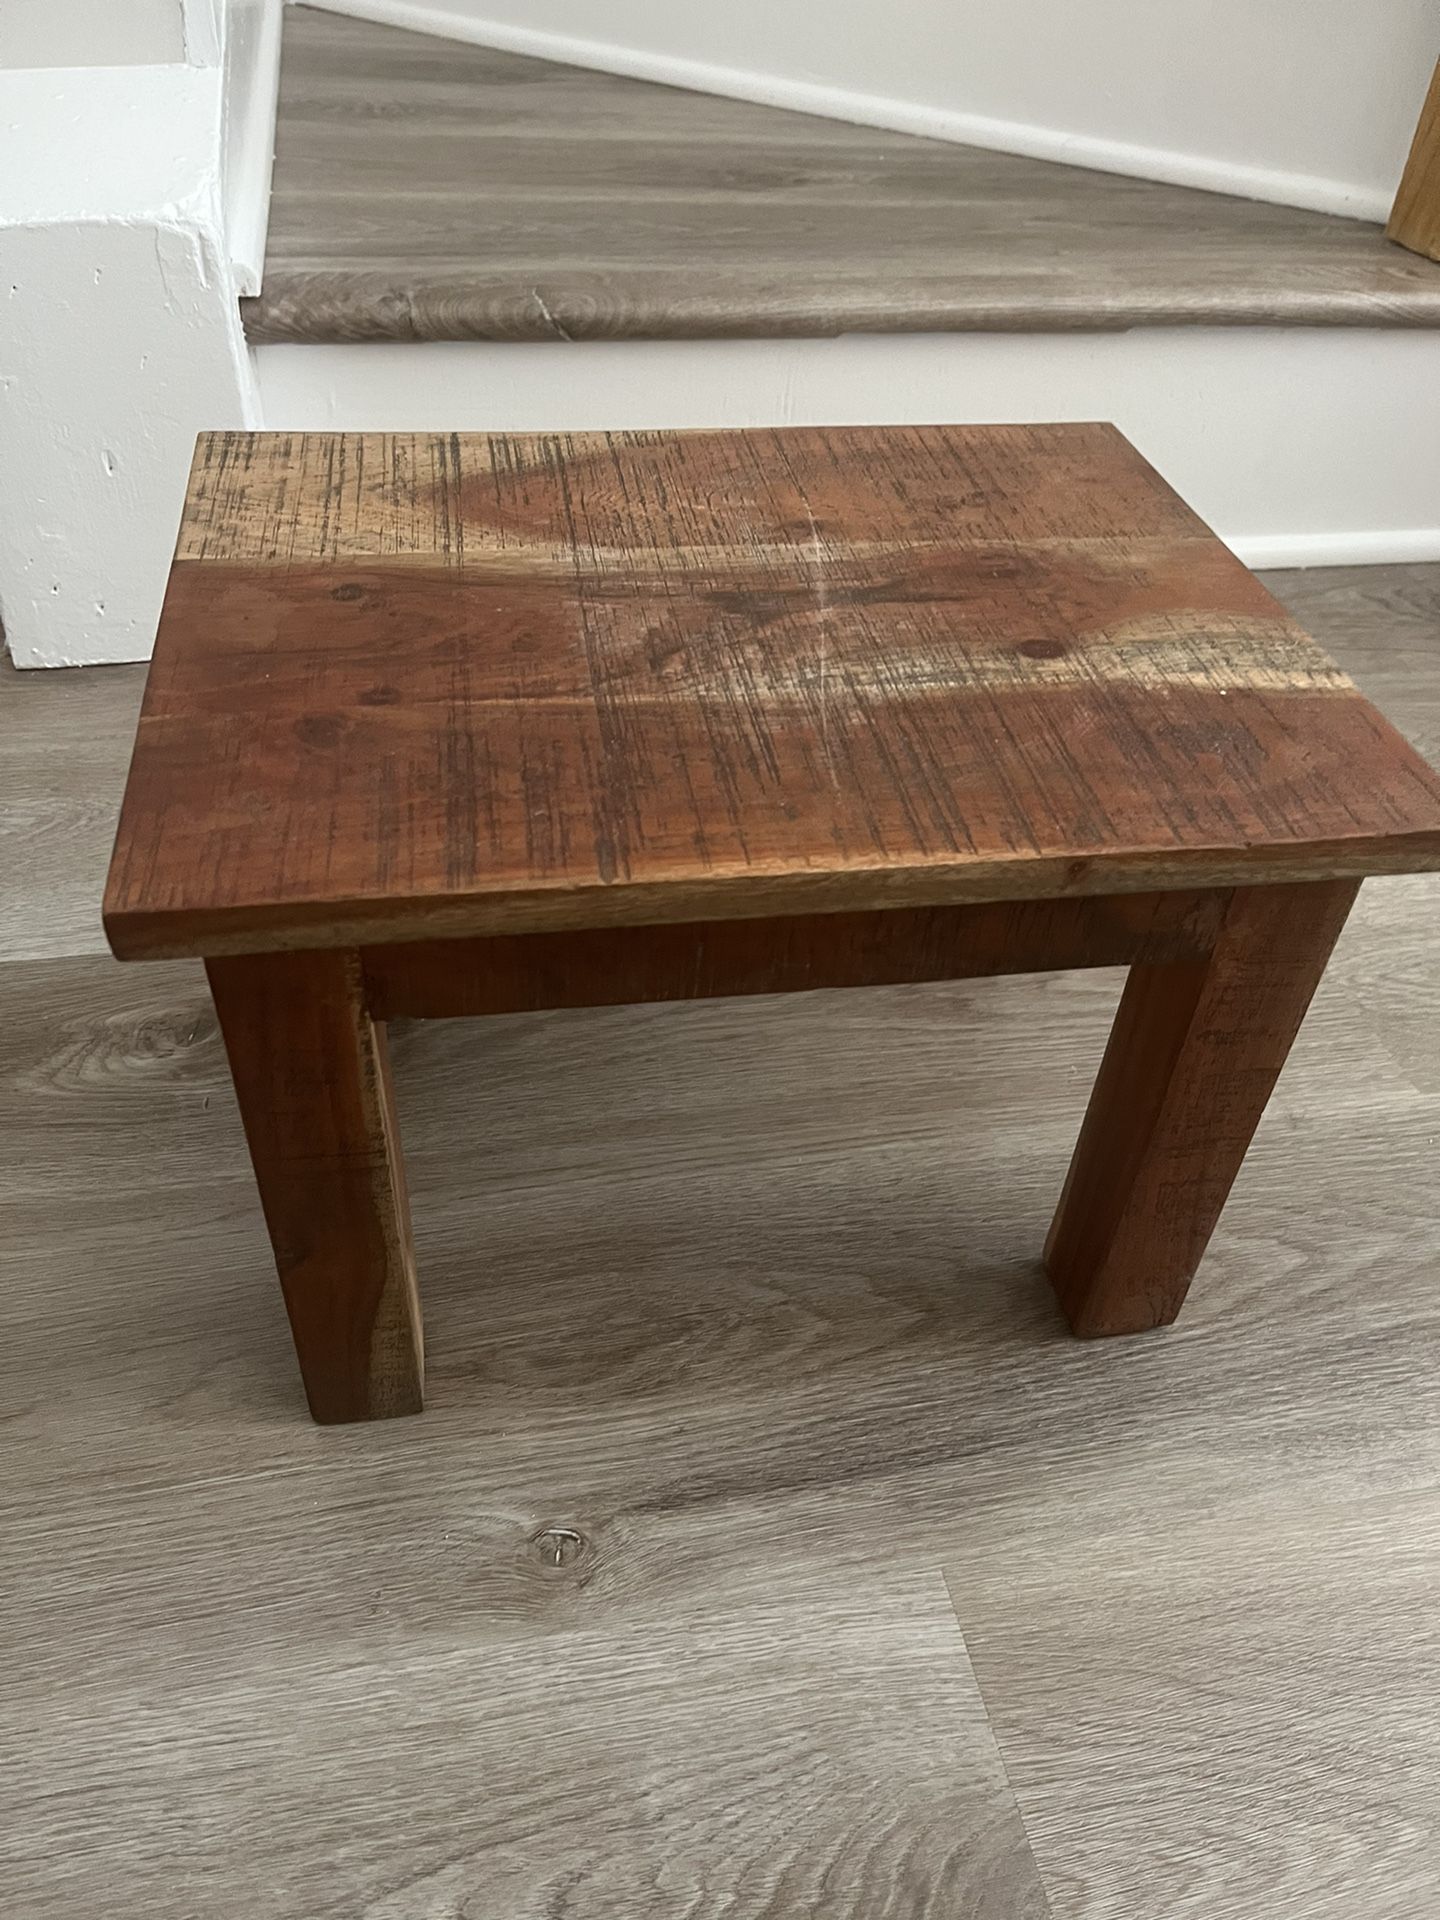 Small Wooden Table/stool 